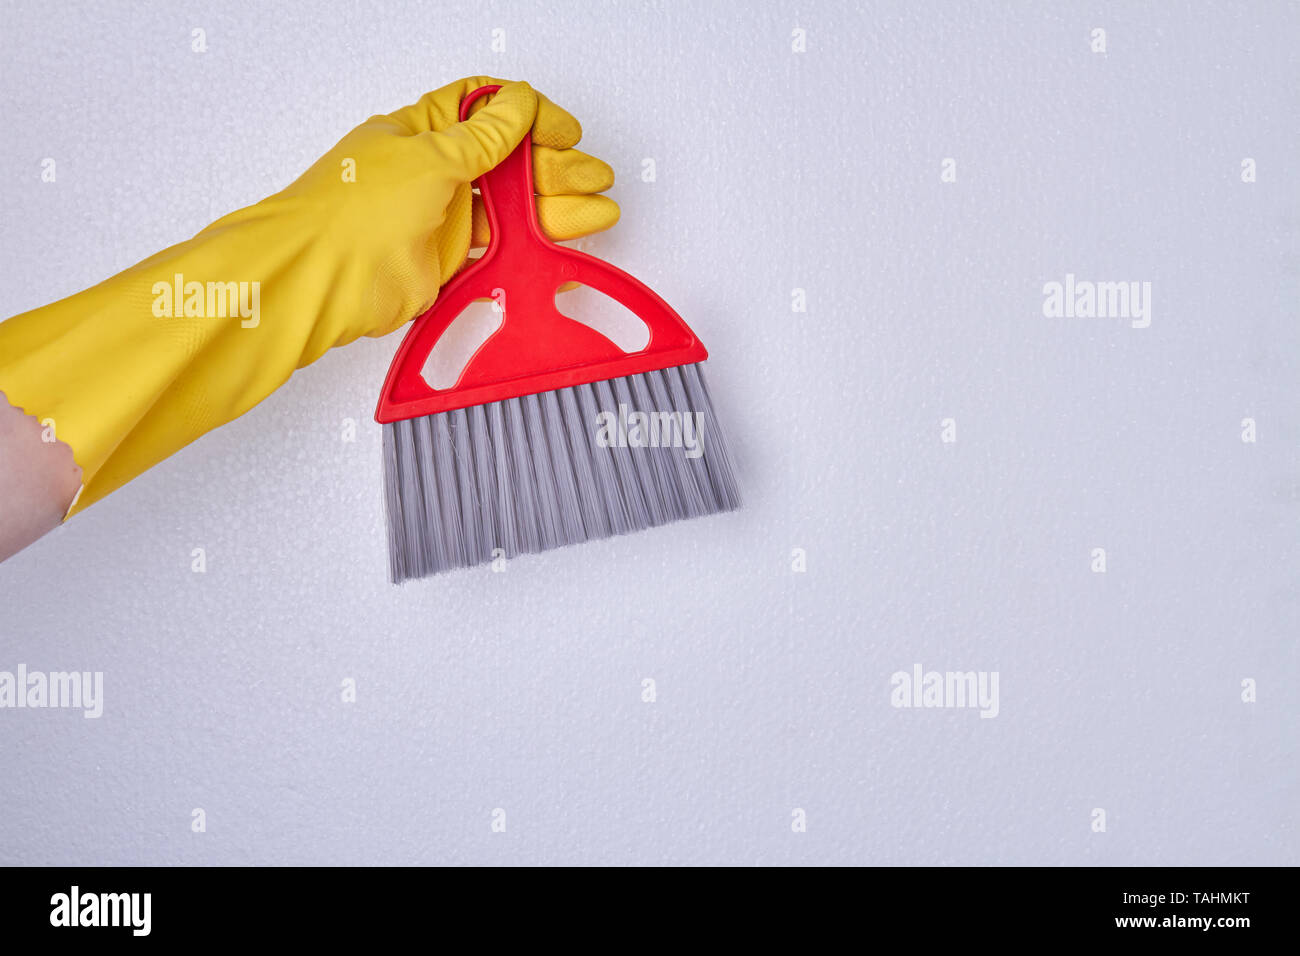 Hand with glove holding cleaning broom. Person in rubber glove holding red cleaning brush. Space for text. Stock Photo